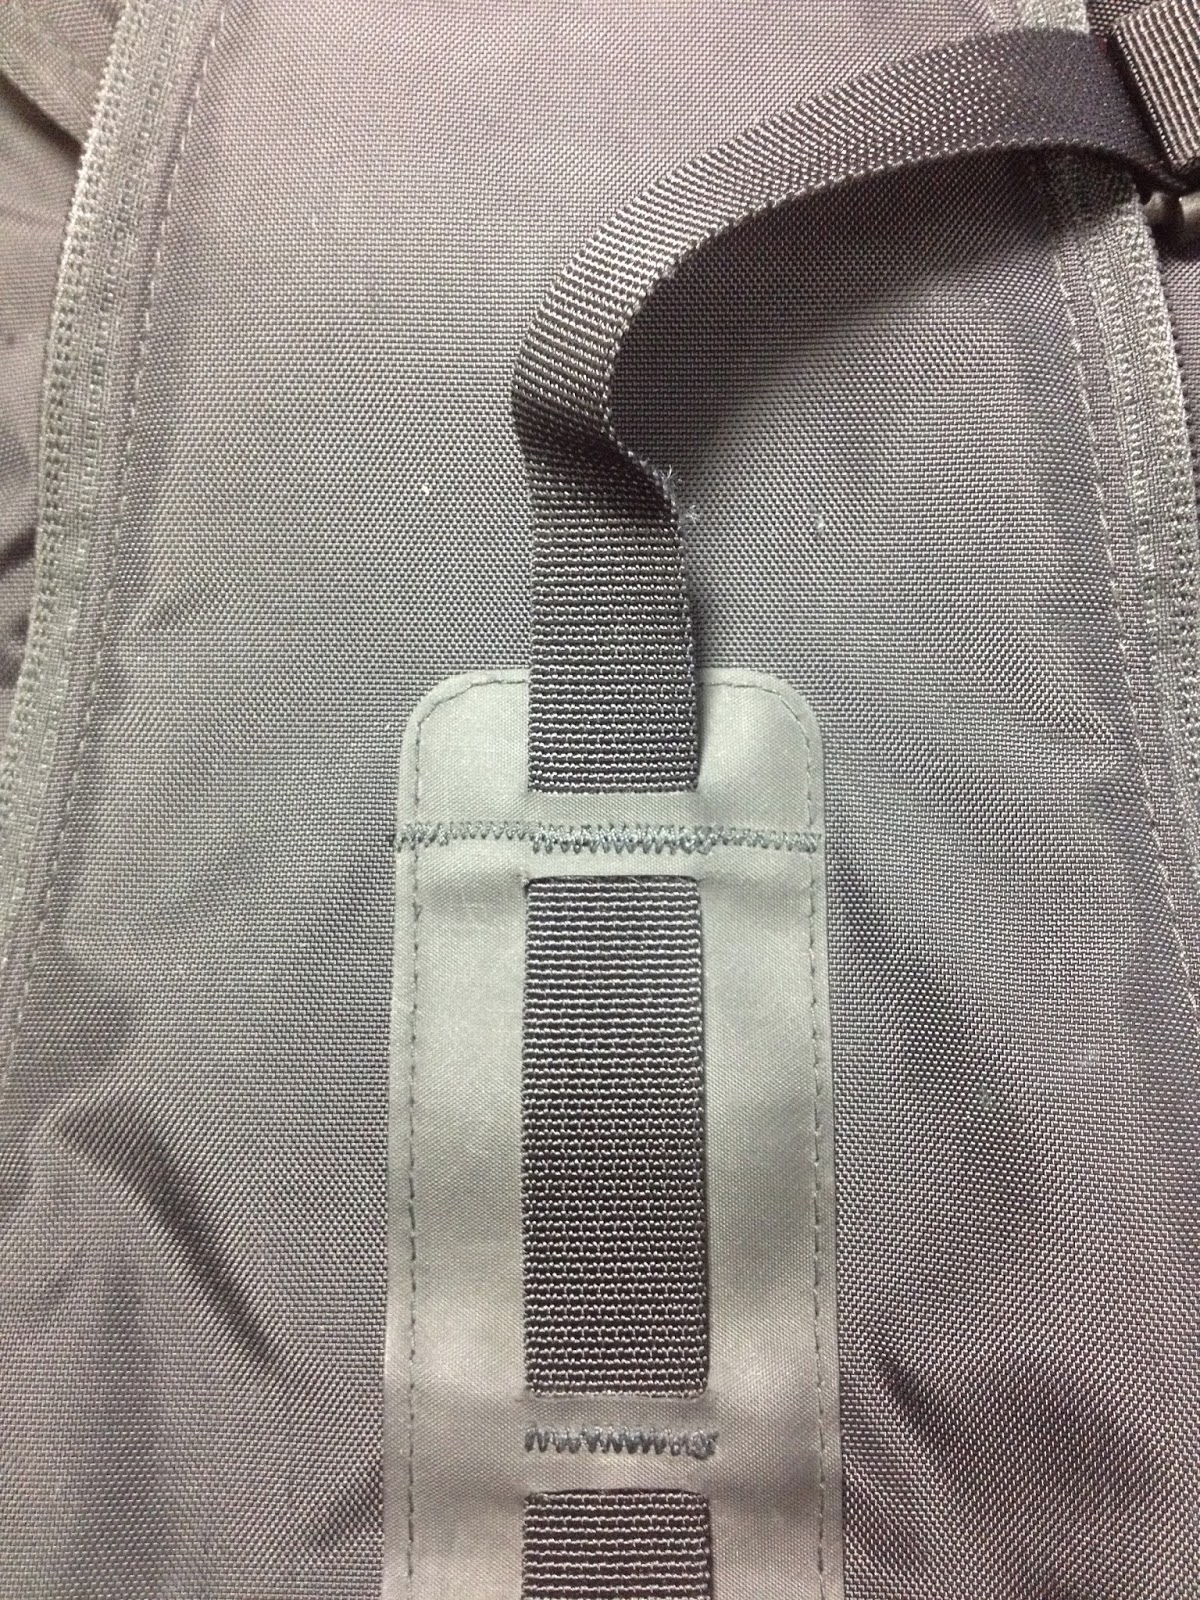 Matthew McMillan: Adding MOLLE / PALS webbing to a backpack